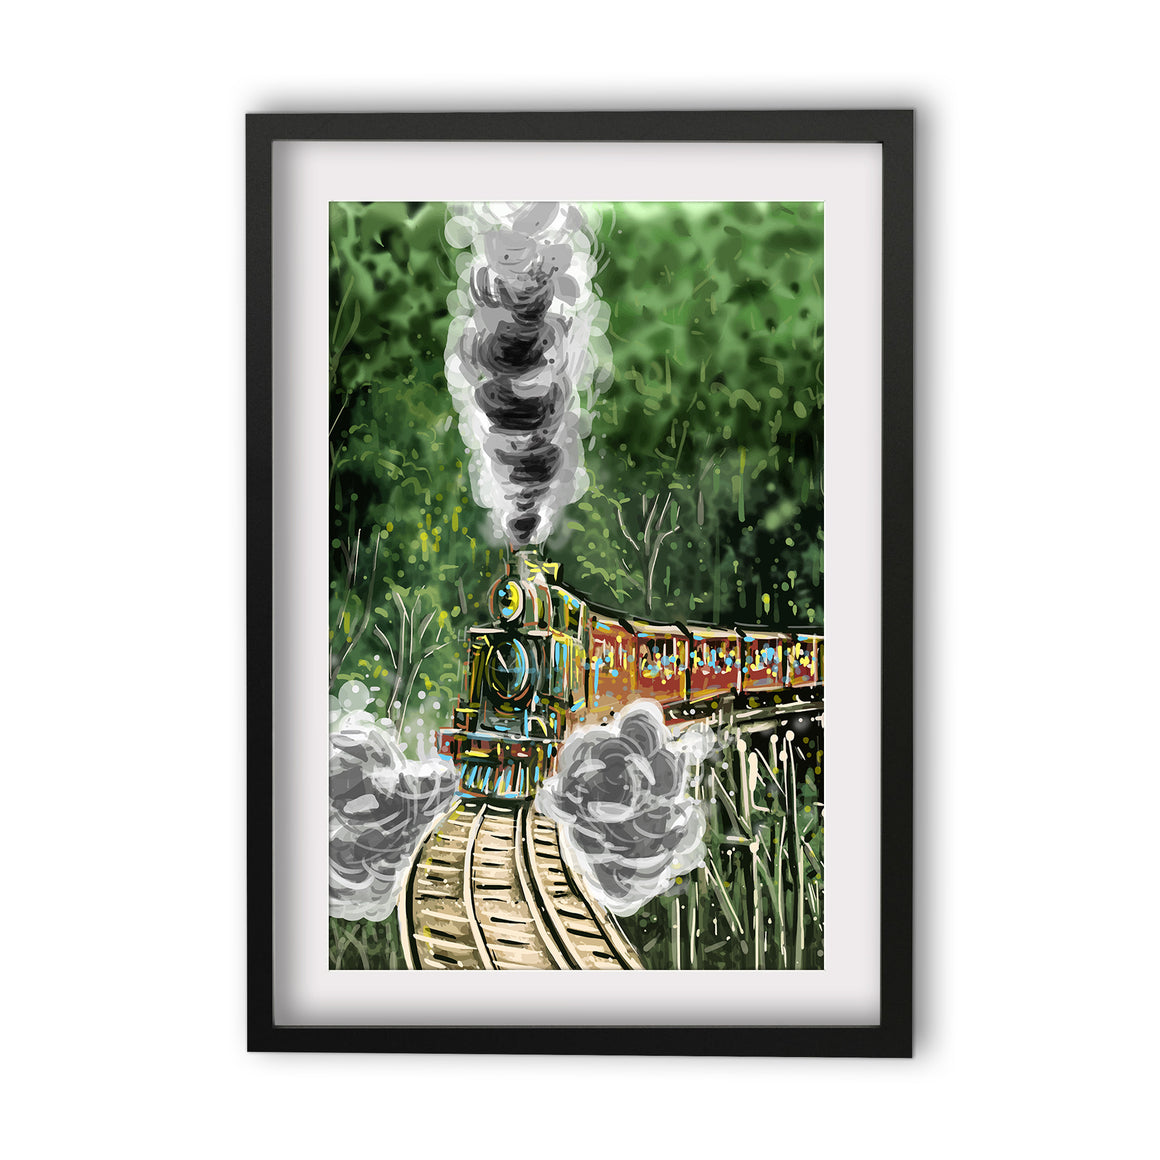 Print (Iconic) - Melbourne Puffing Billy (Portrait)